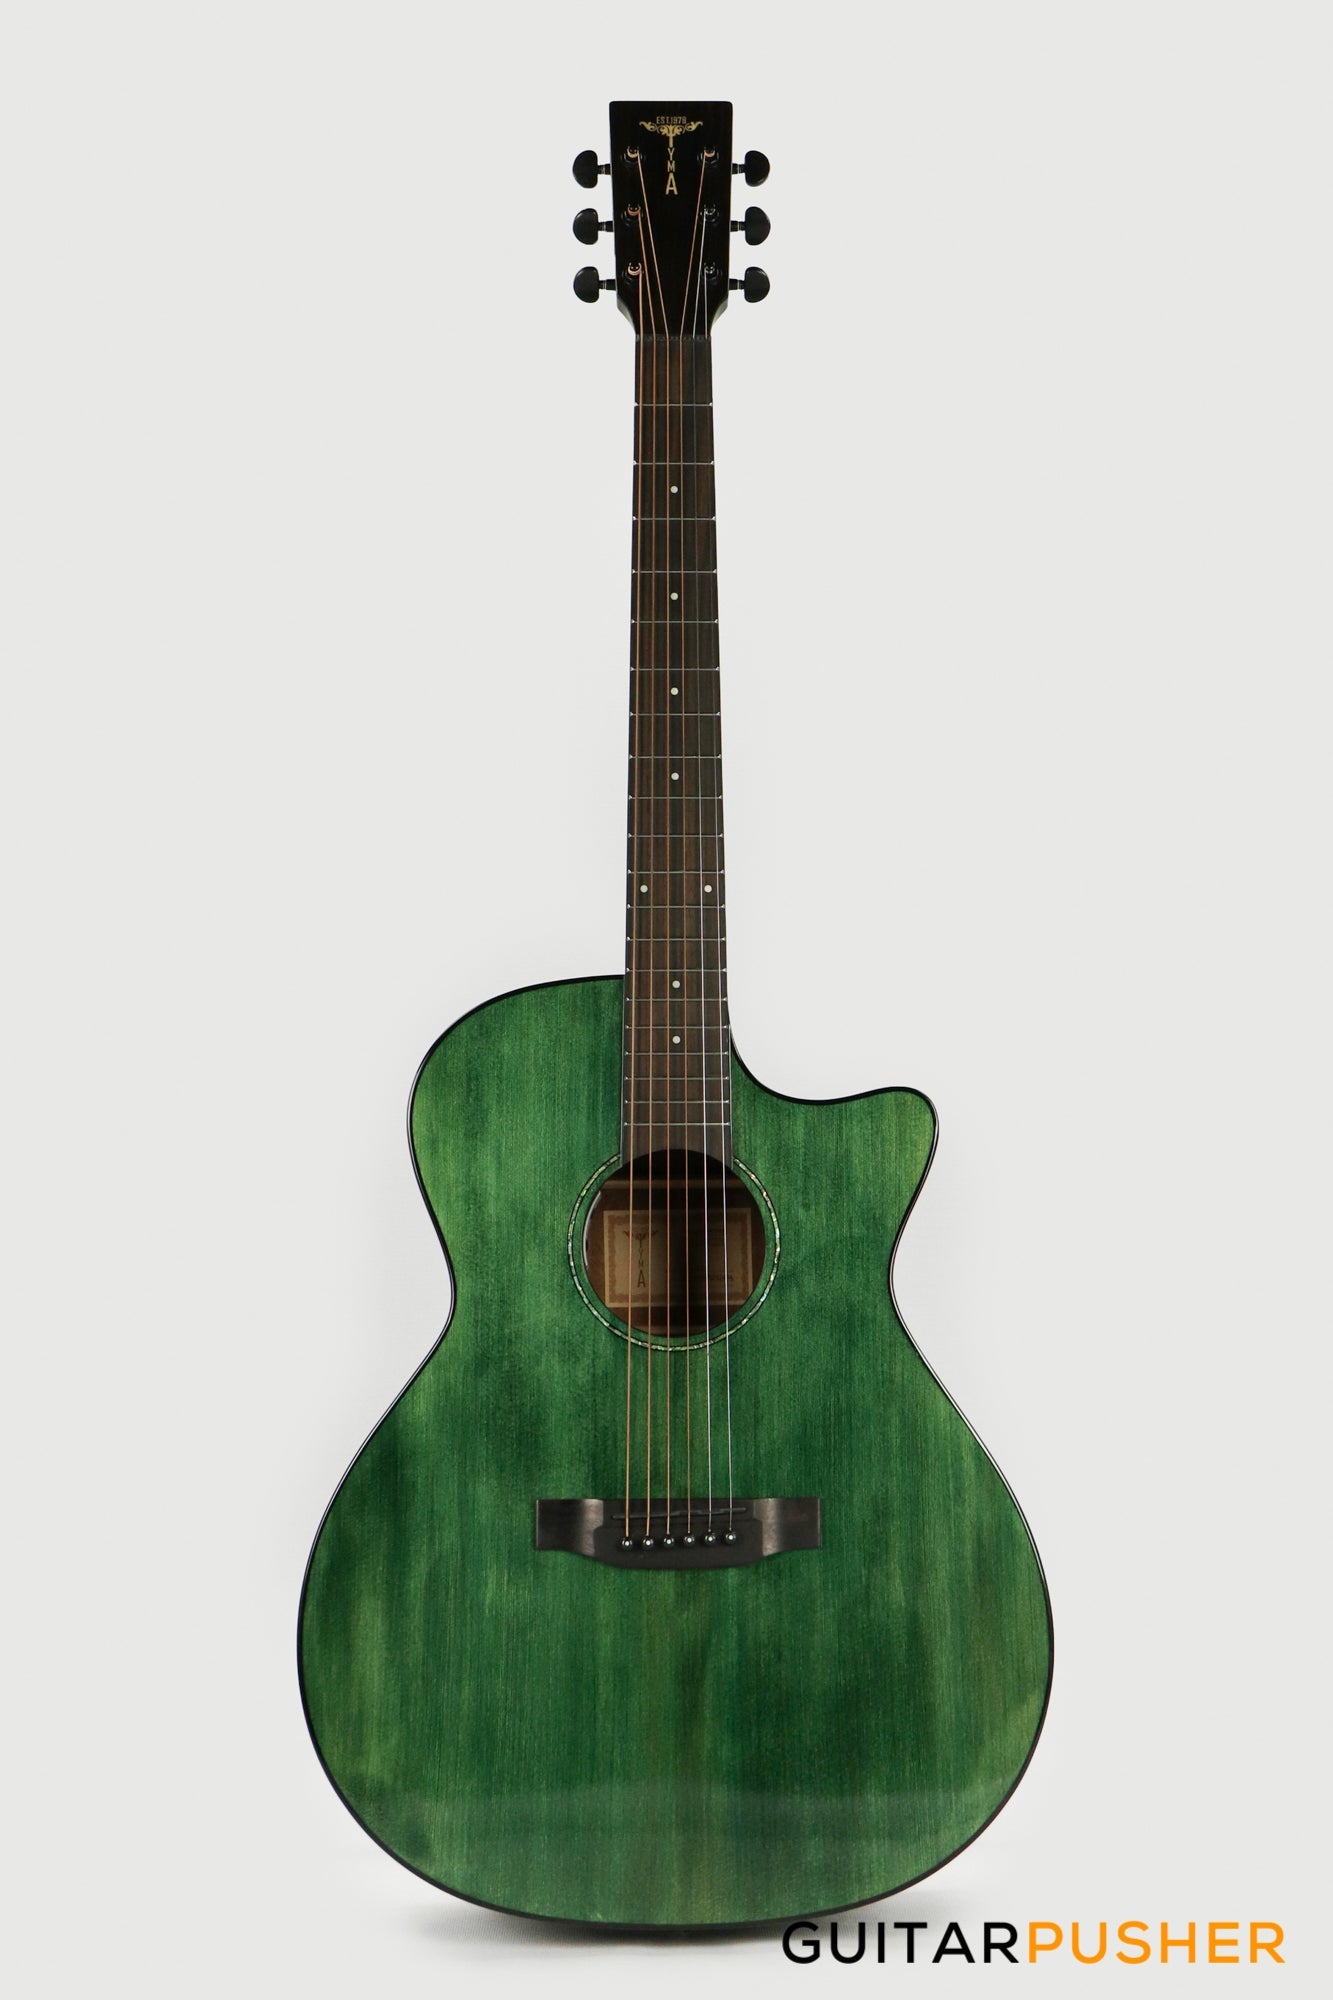 Tyma G-3 CGE Solid Sitka Spruce Top Mahogany Auditorium Acoustic-Electric Guitar with T-200 preamp (Coral Green)